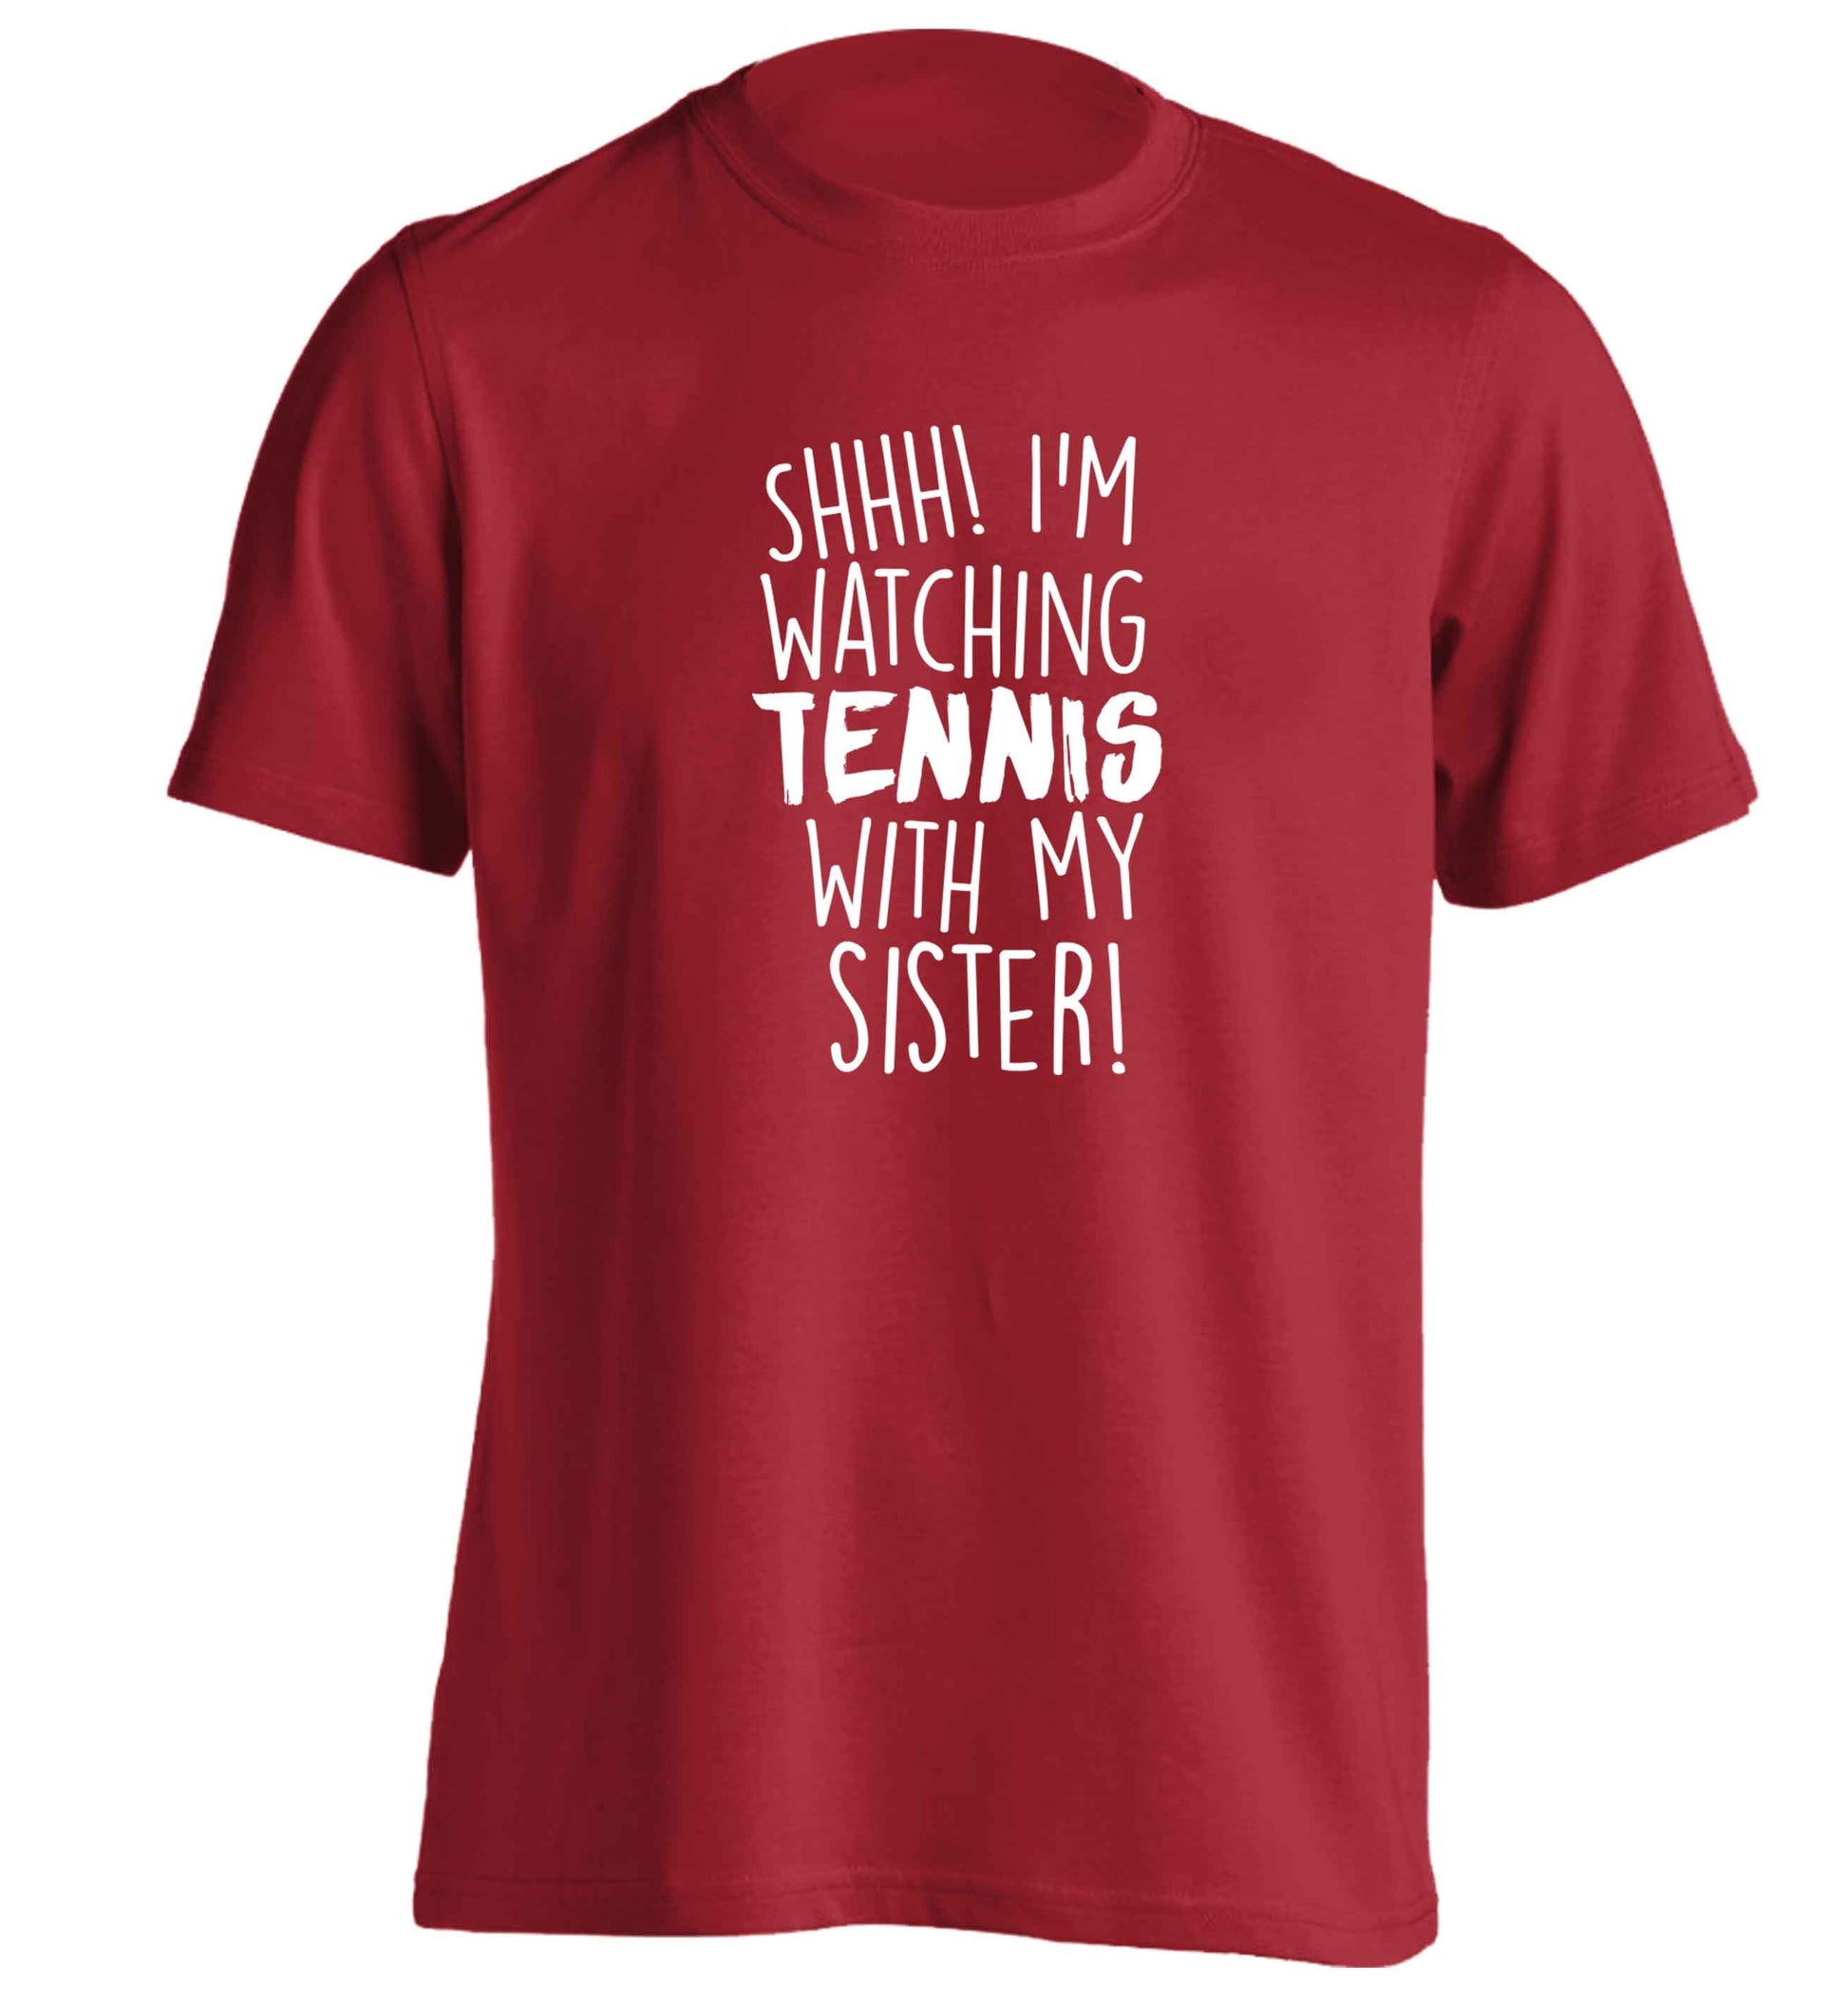 Shh! I'm watching tennis with my sister! adults unisex red Tshirt 2XL